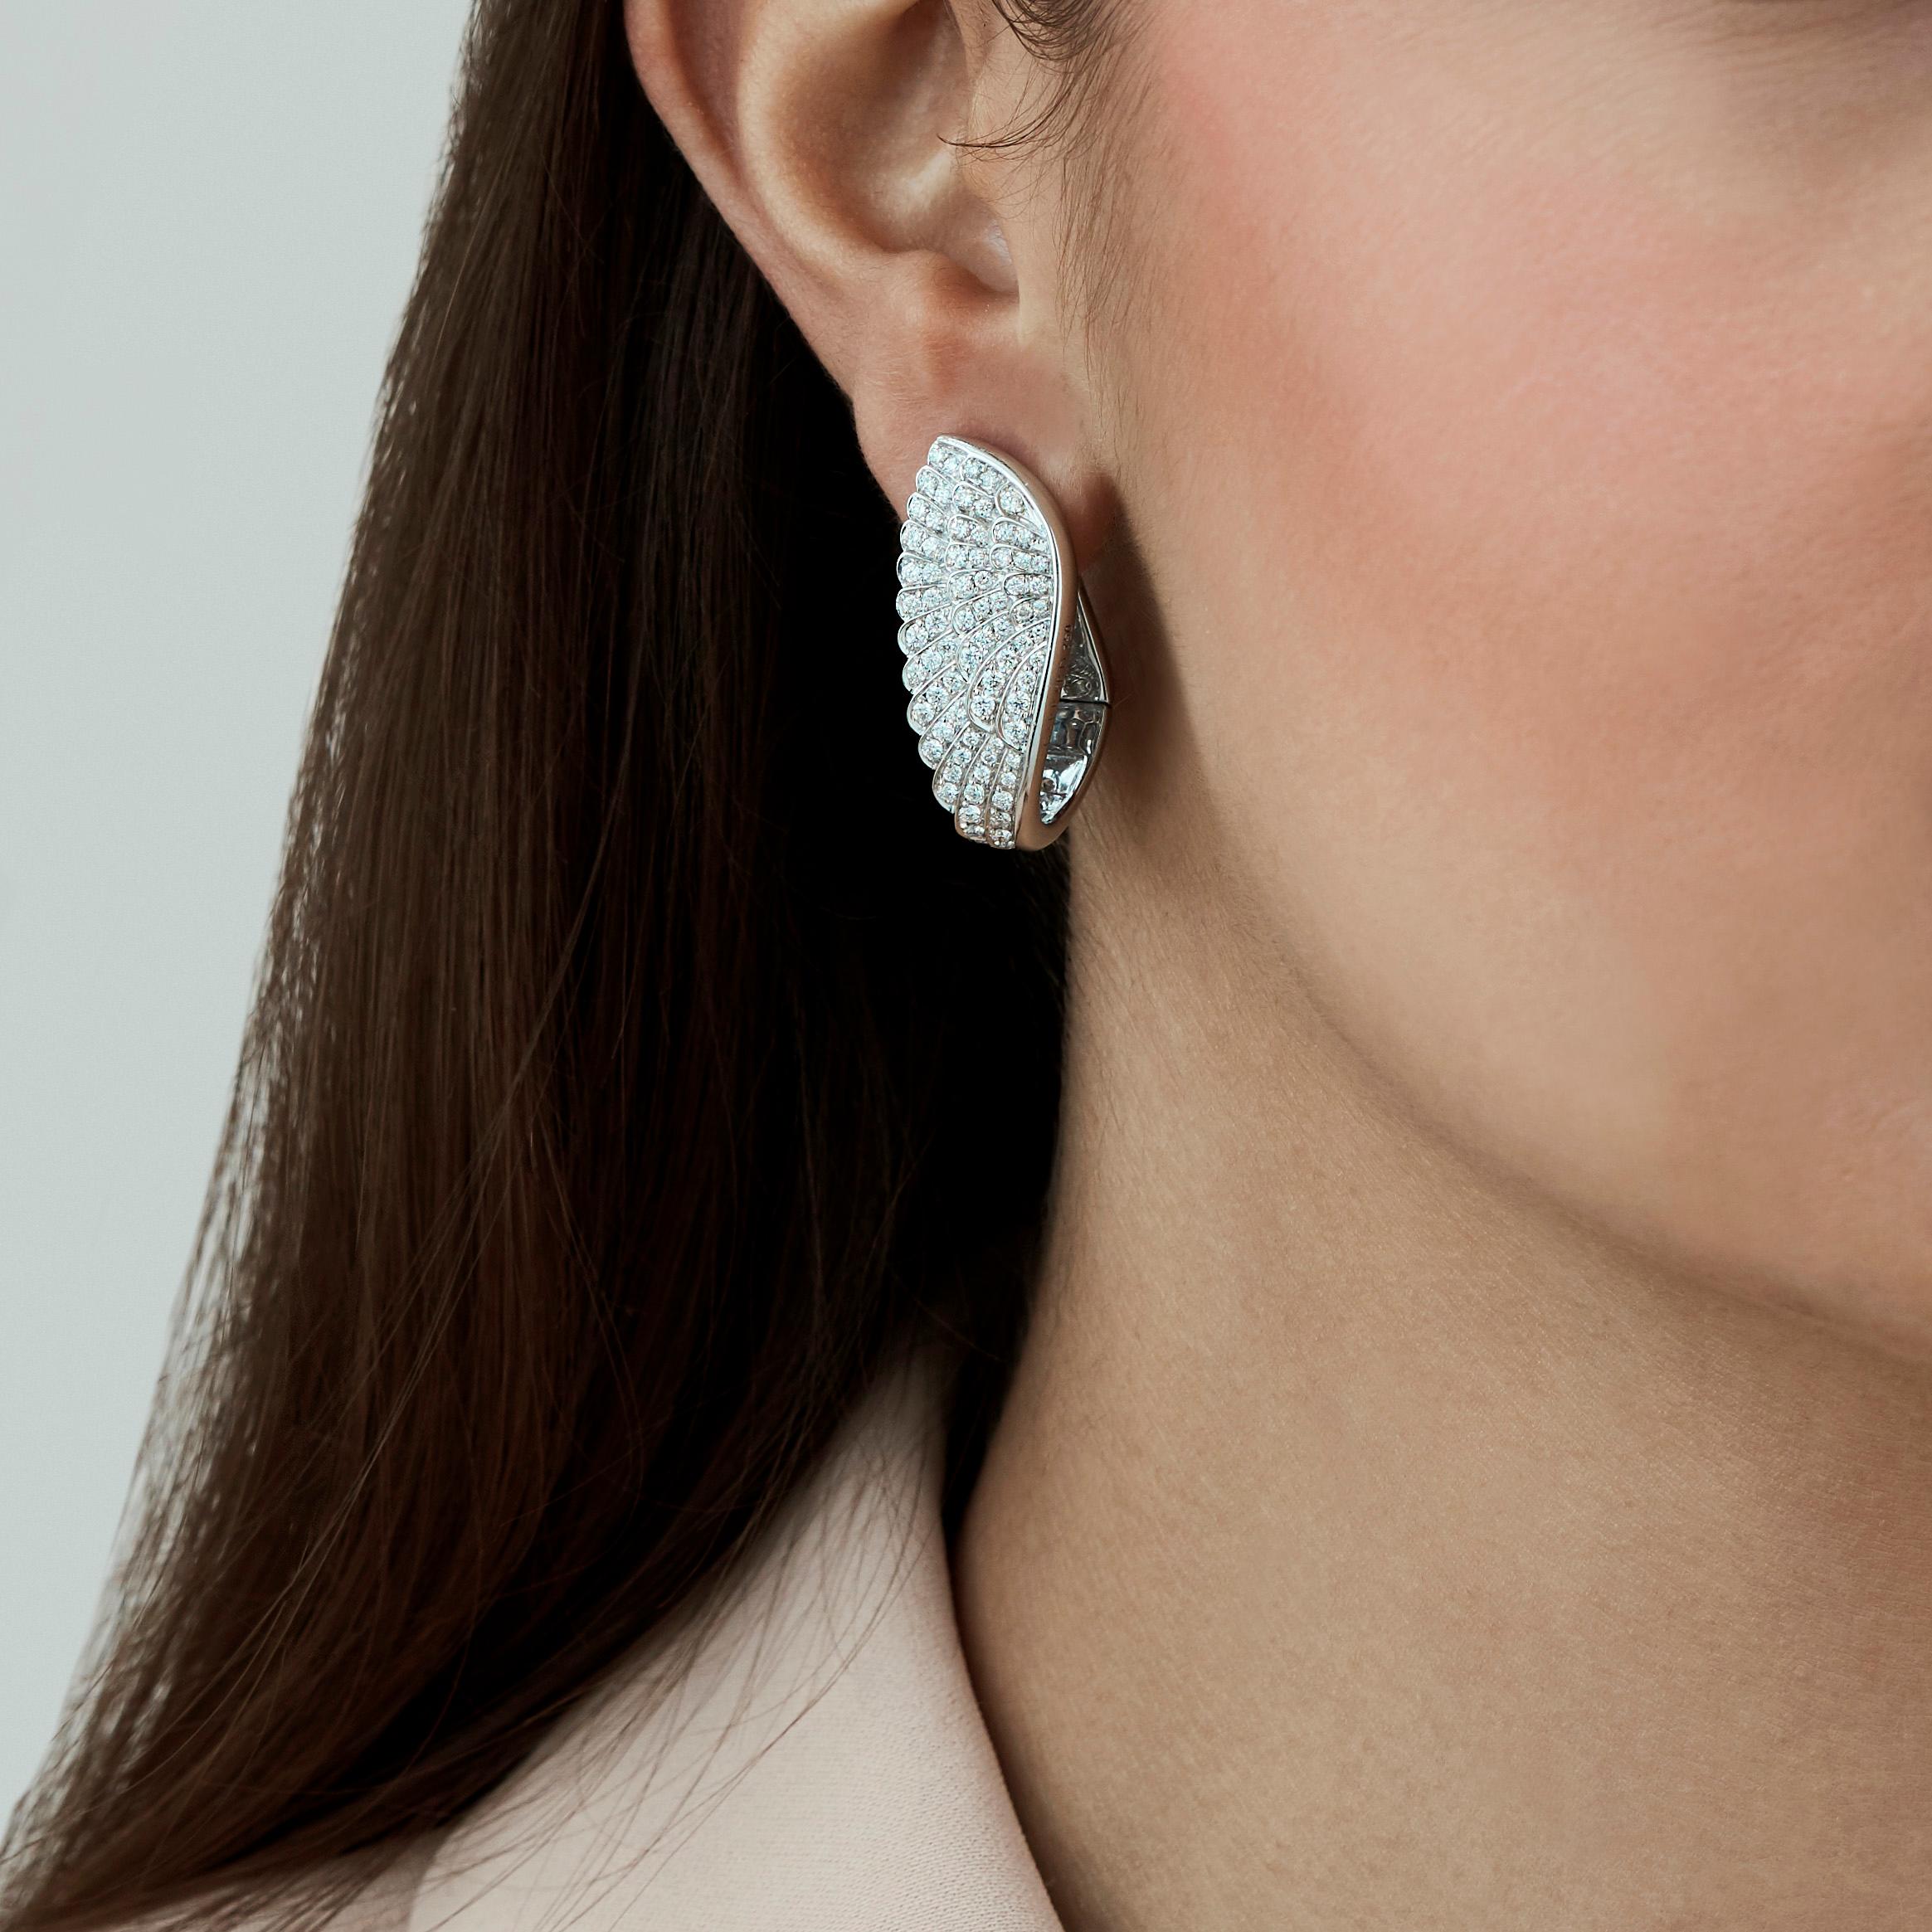 A House of Garrard pair of 18 karat white gold wrap earrings from the 'Wings Classic' collection, set with round white diamonds.

216 round white diamonds weighing: 0.55cts

The House of Garrard is the longest serving jeweller in the world. The